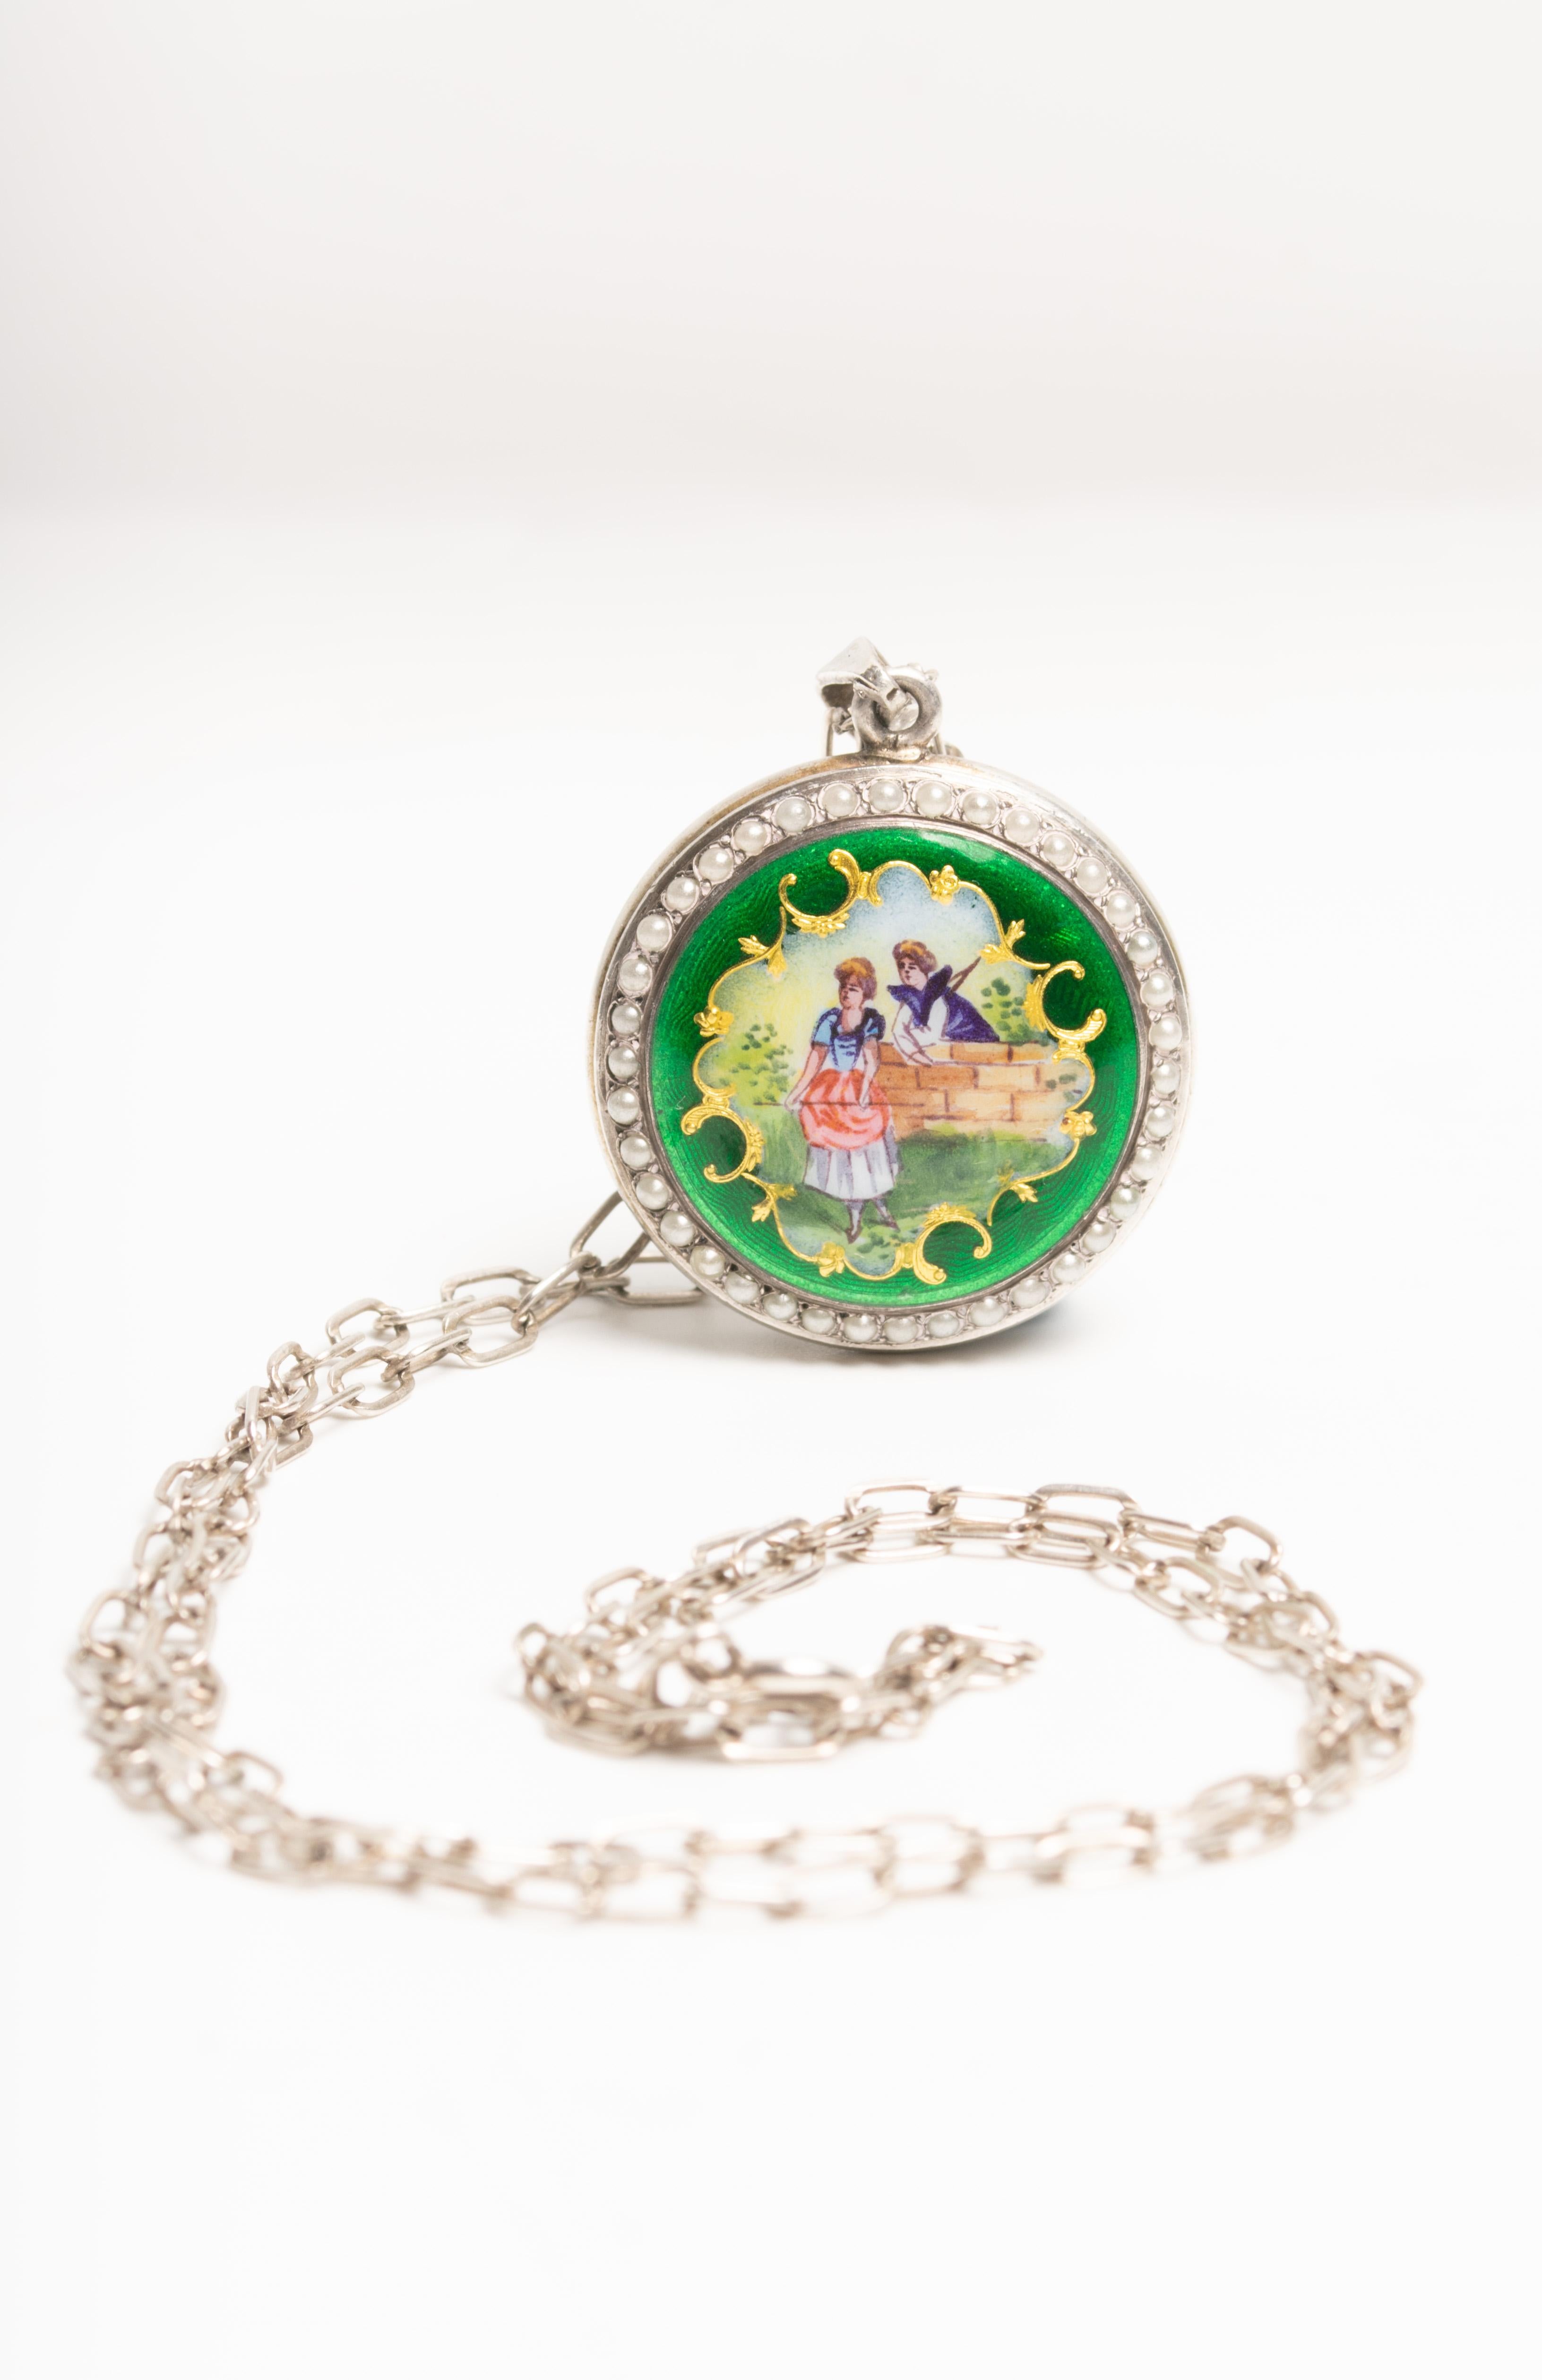 Exquisite Antique Swiss green guilloche enamel and silver locket. We believe the piece was a ladies pocket watch previously and converted to a locket later. This enamelled locket was made in Switzerland and it's decorated with a hand painted